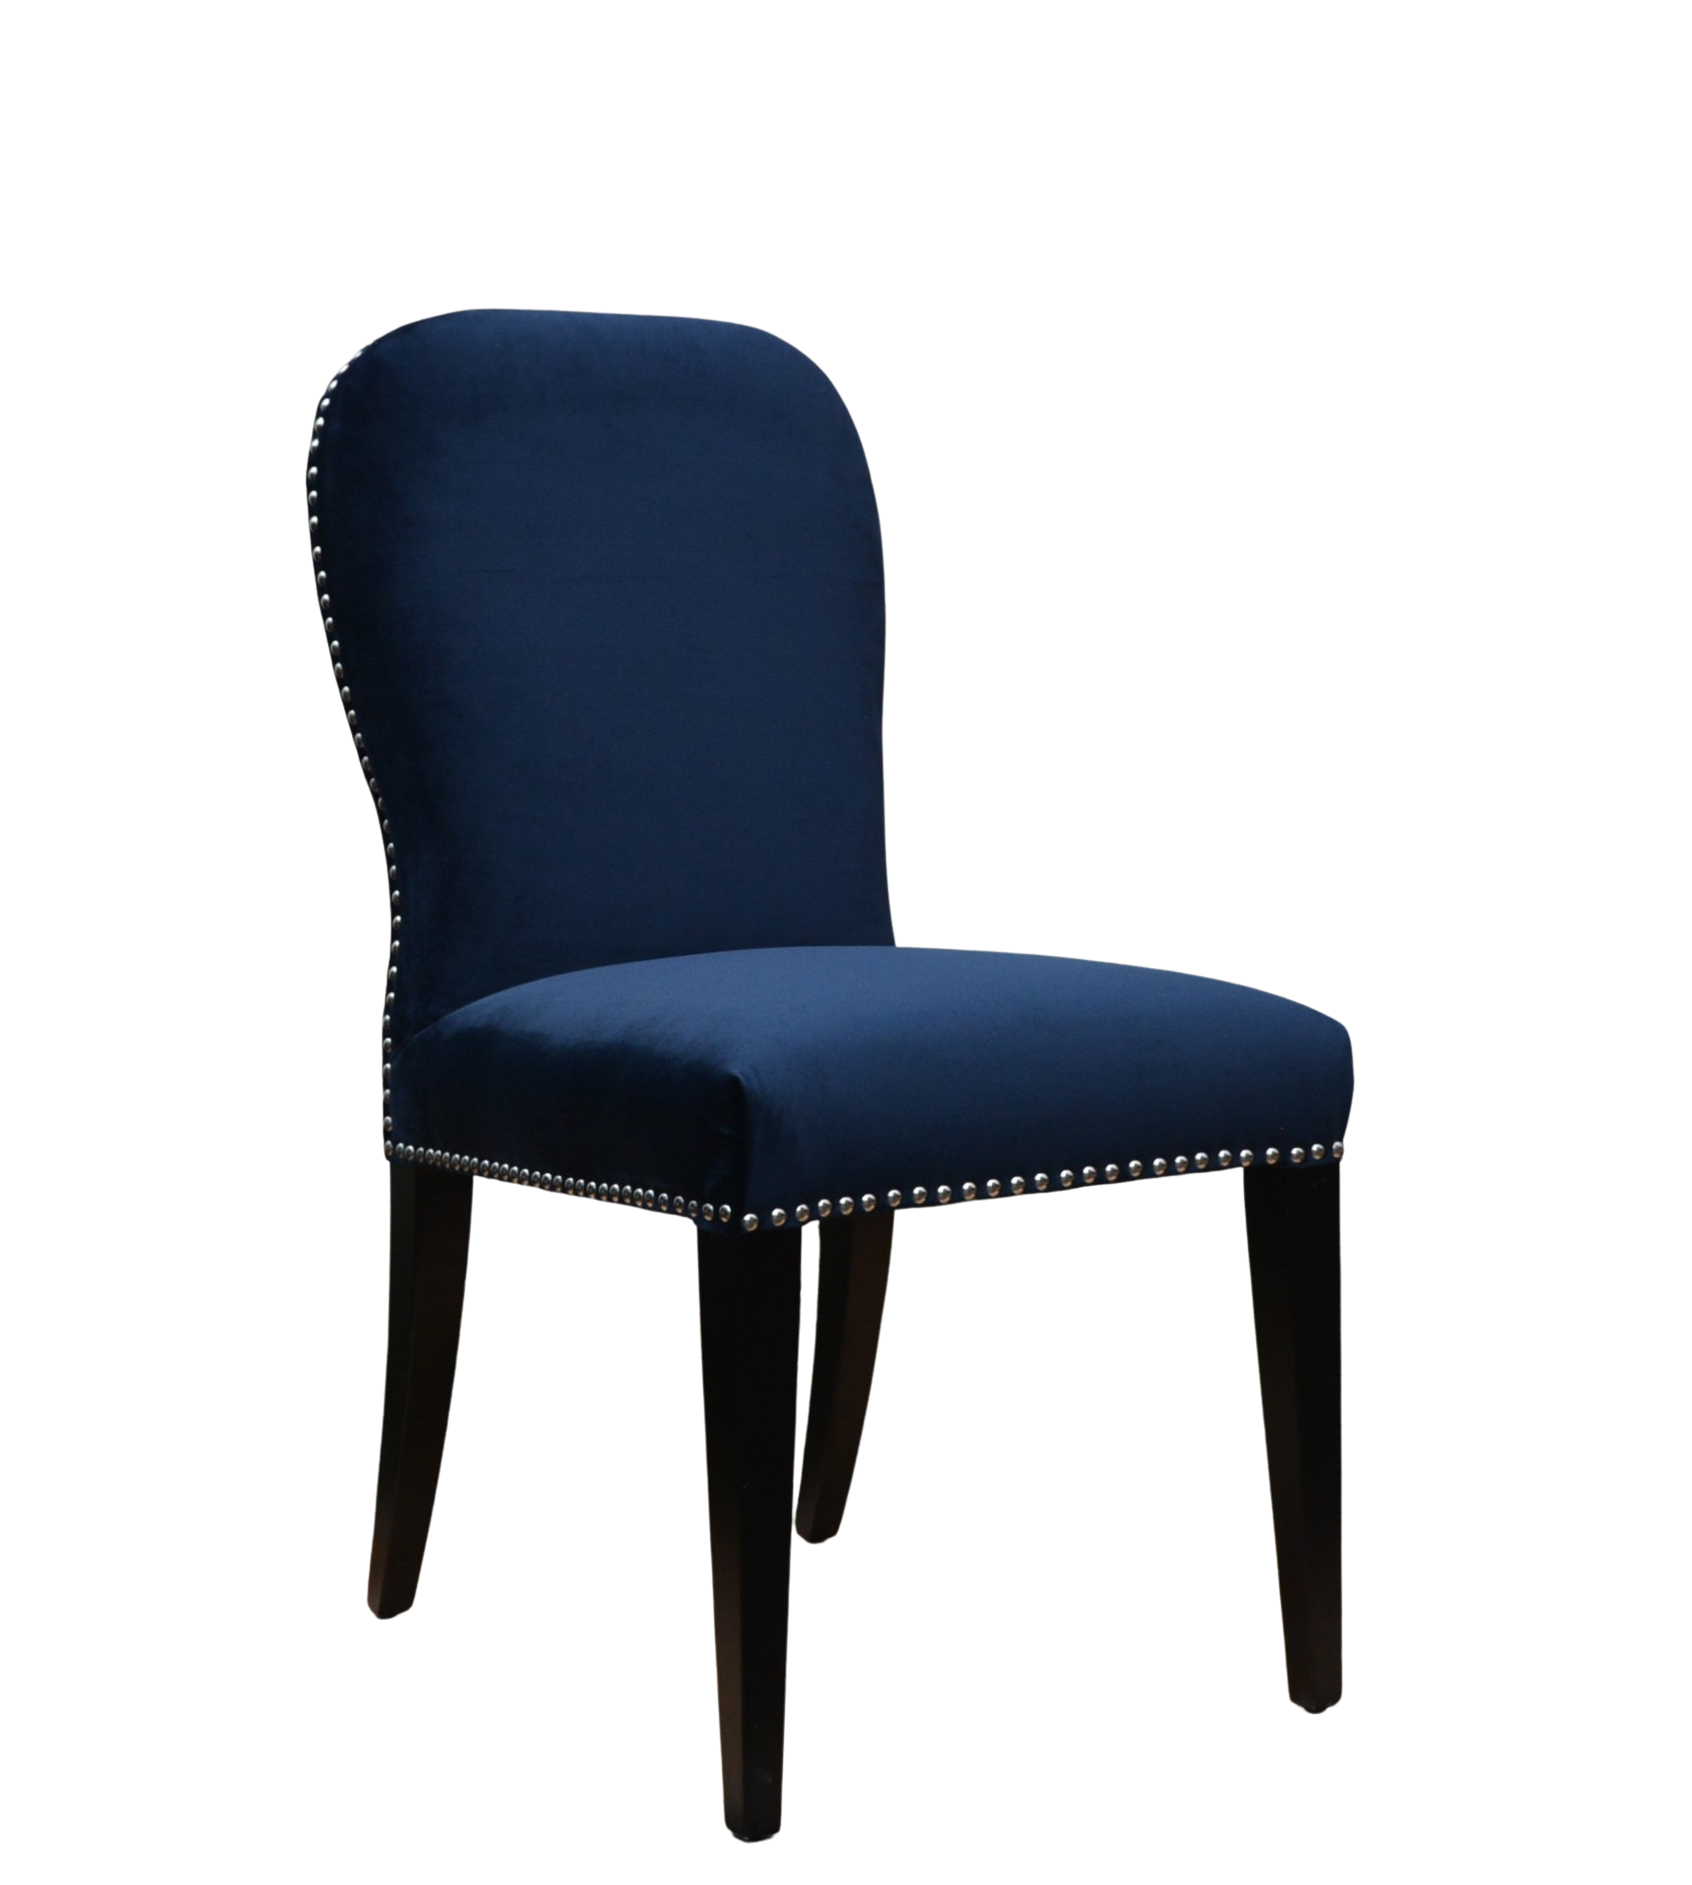 The Amelia Dining Chair